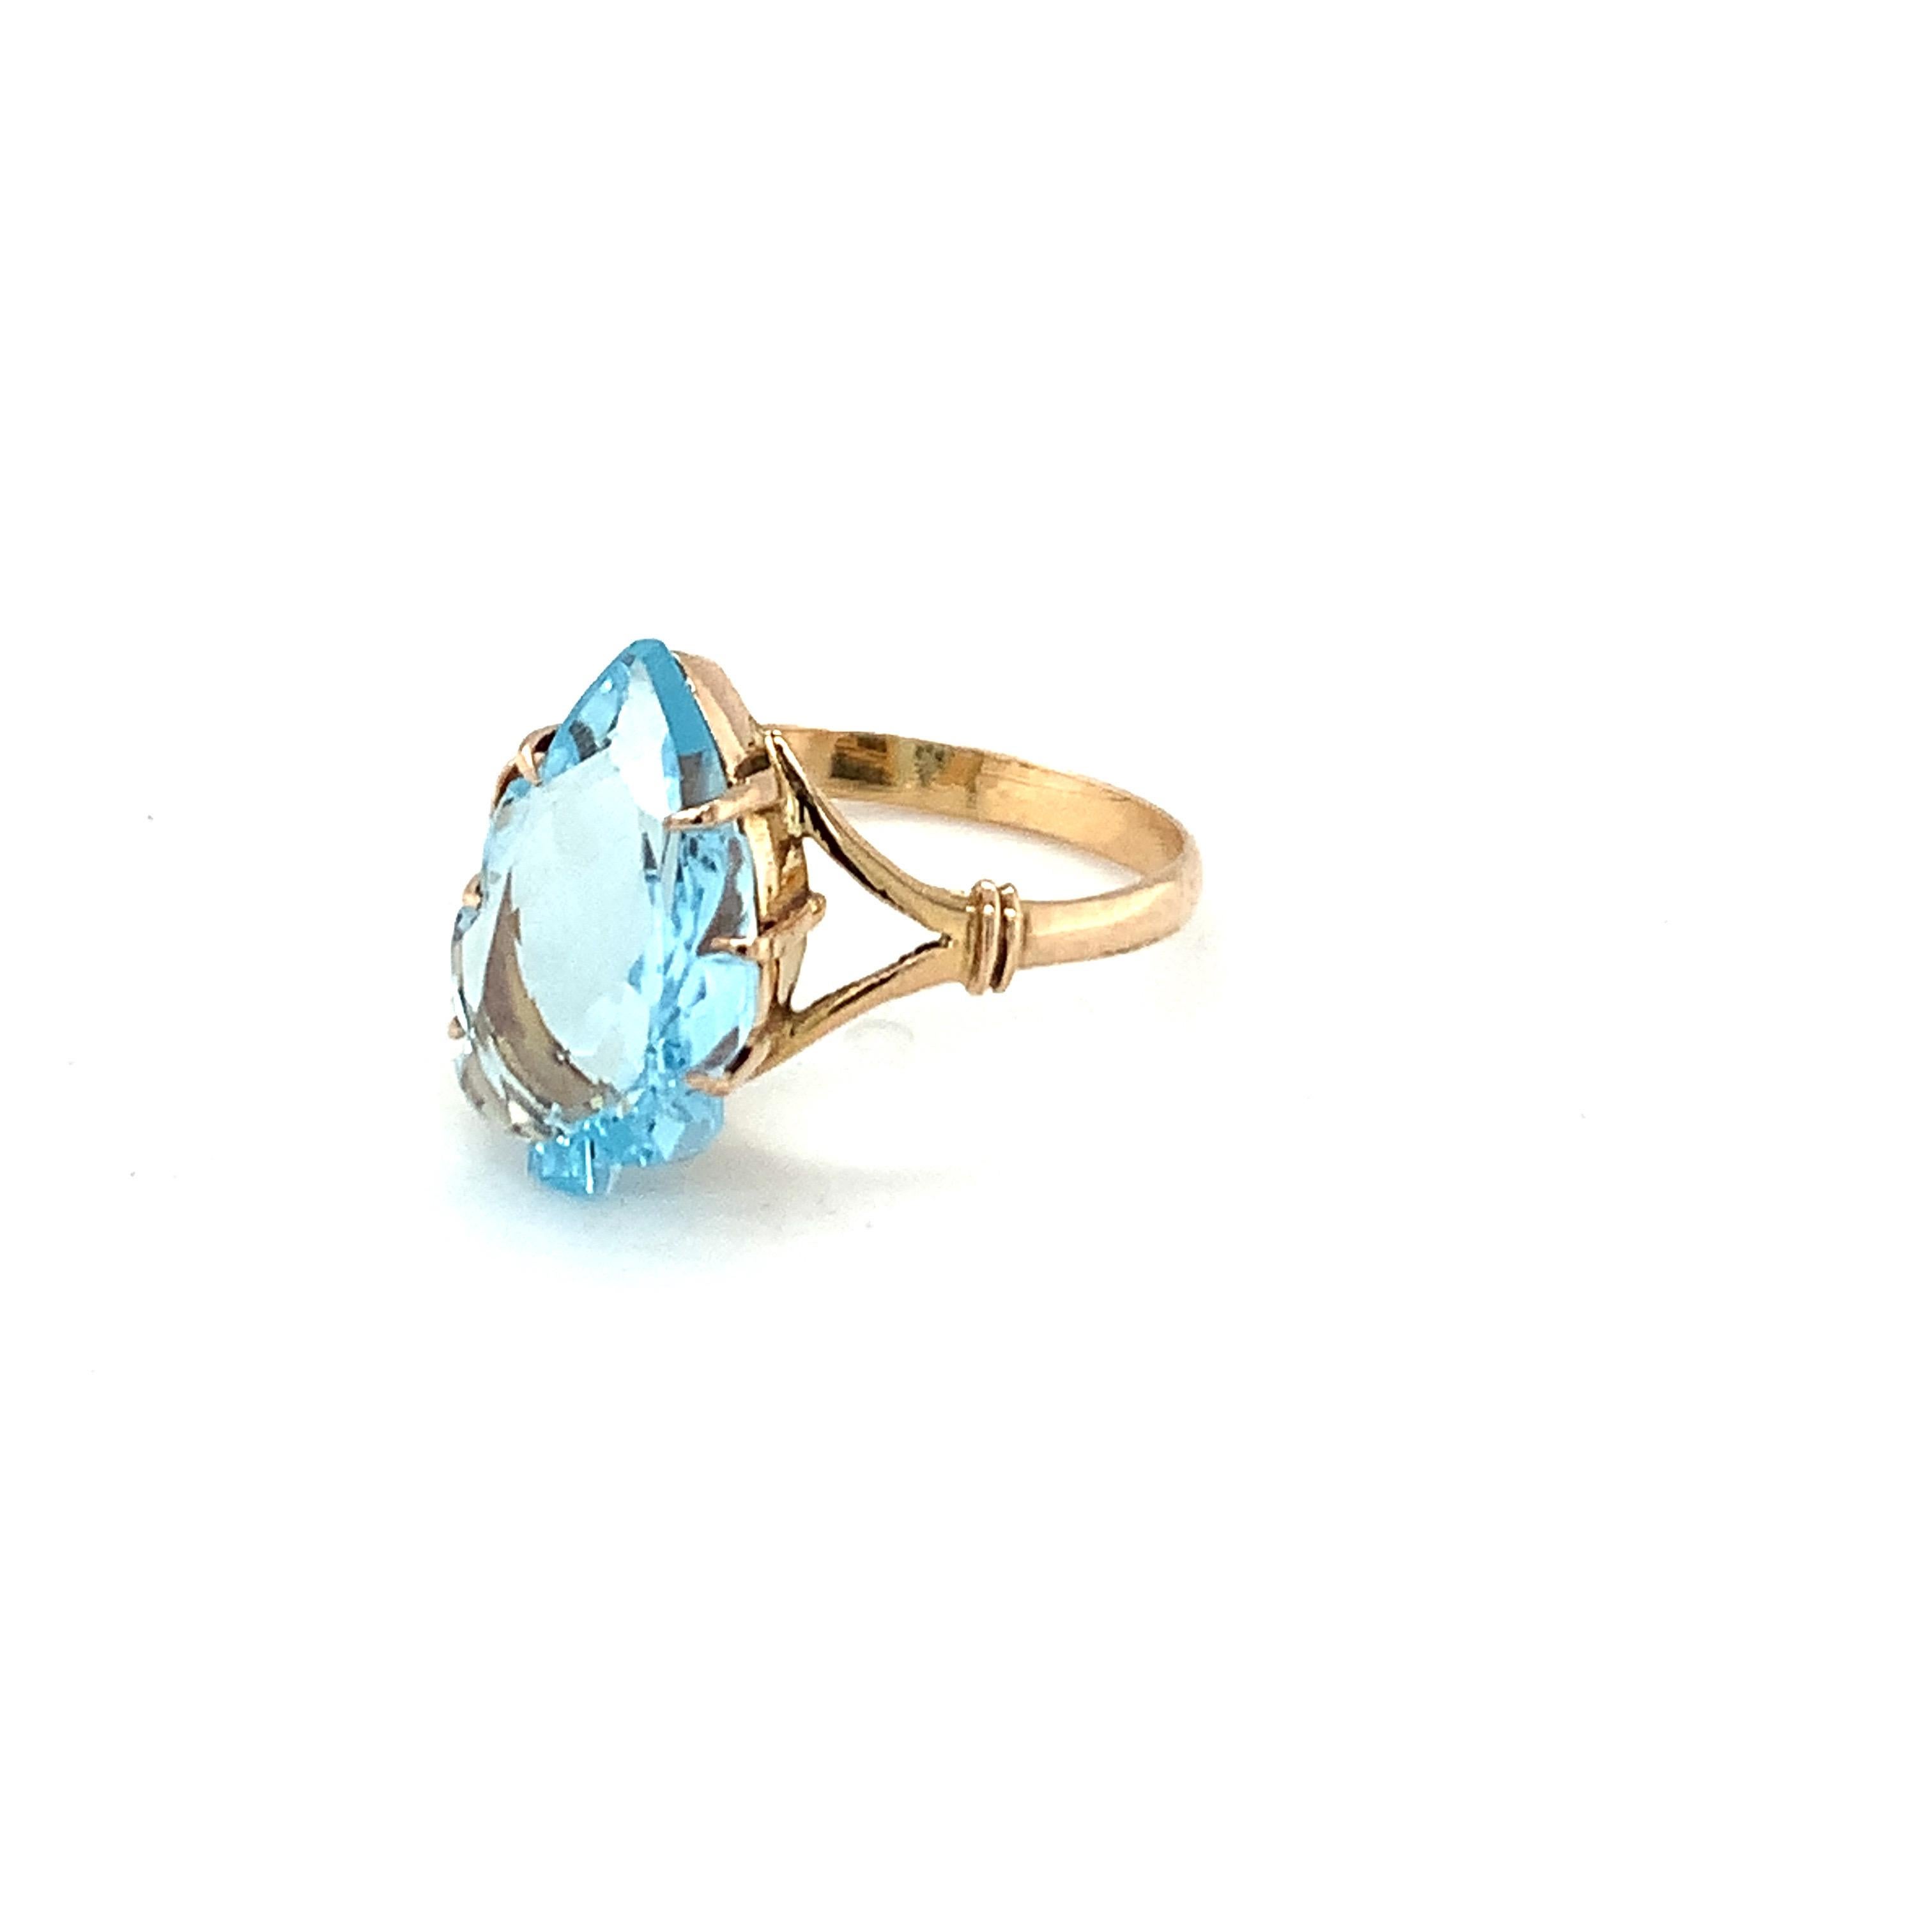 Tear Drop Blue Topaz Ring Set in 14k Yellow Gold For Sale 1